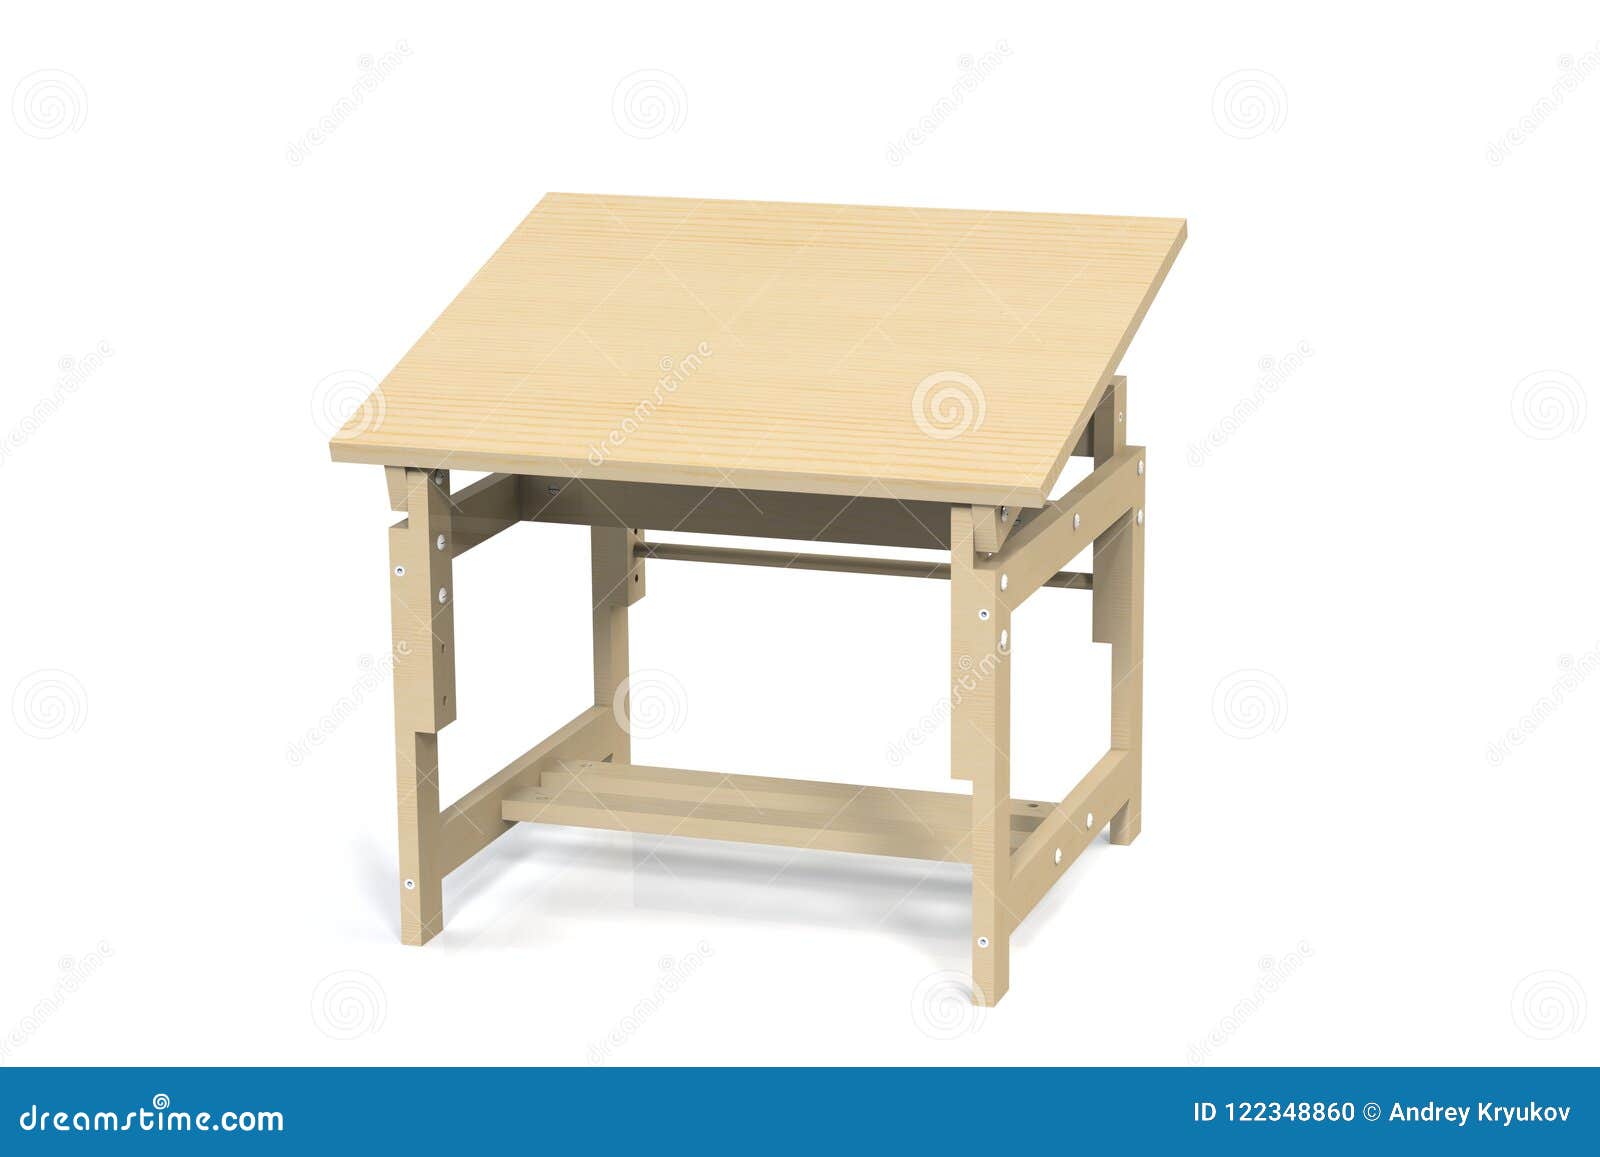 Children S Small Wooden Table On A White Background Isolate